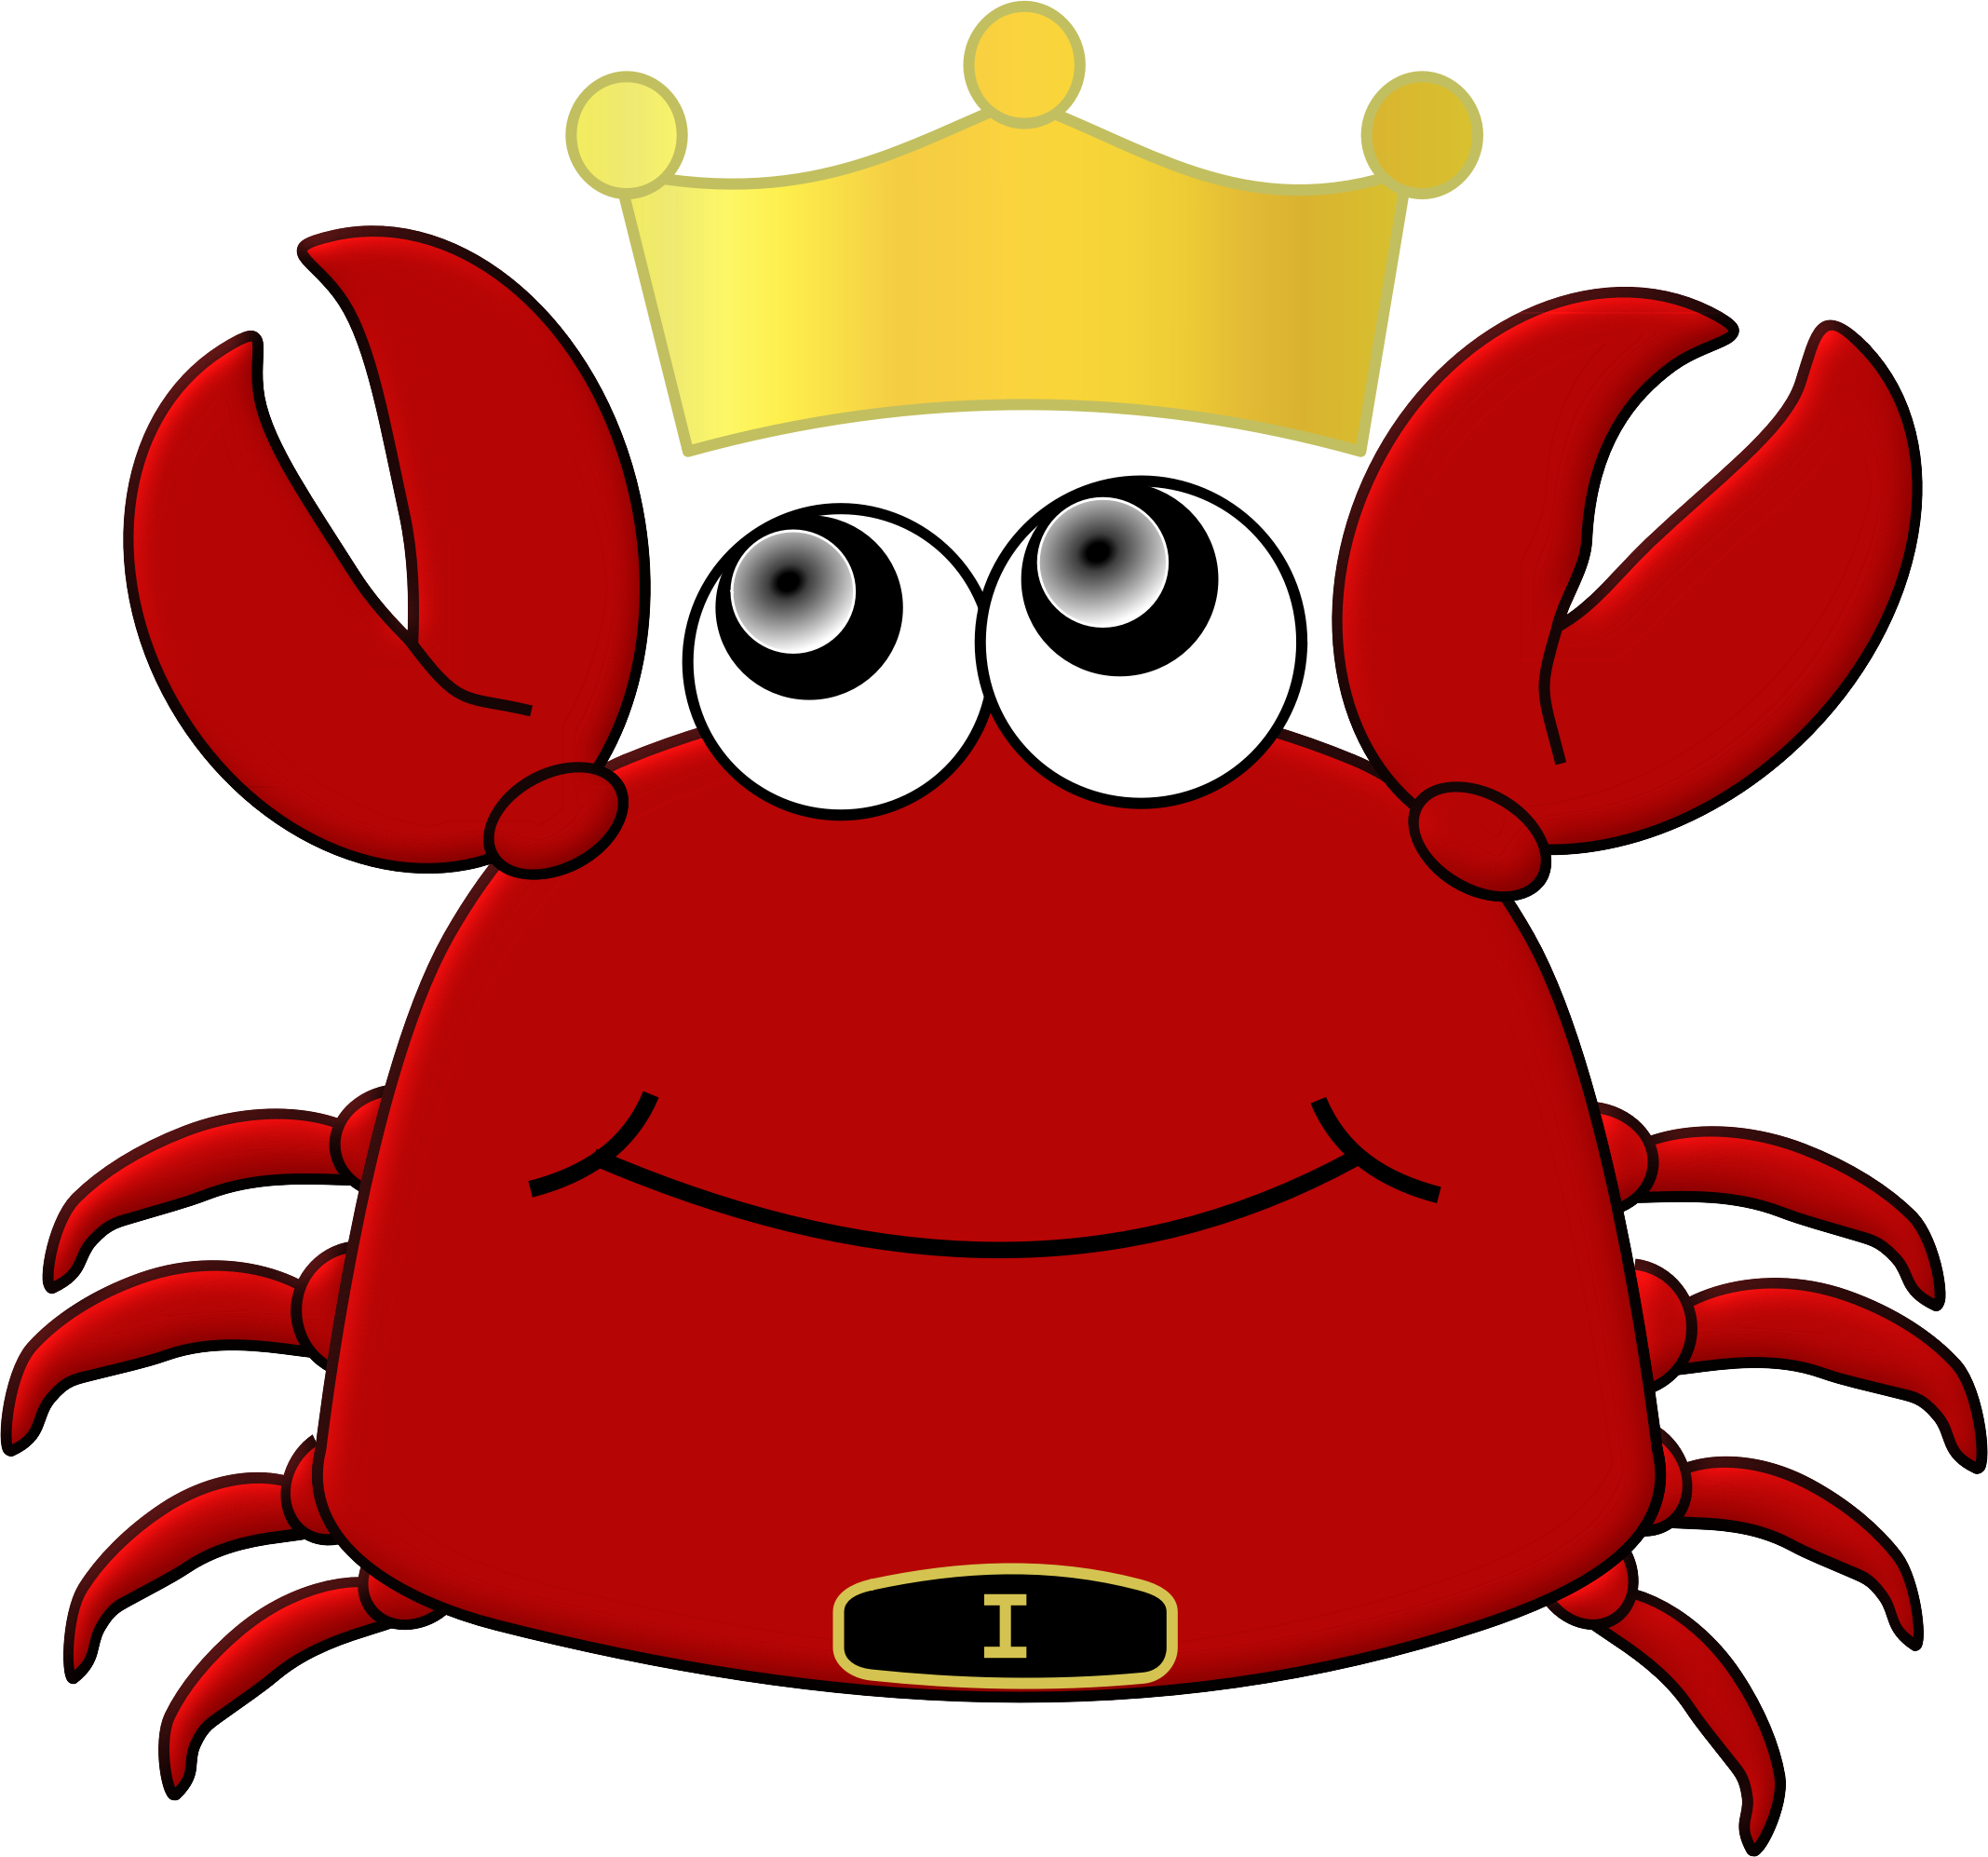 Red king crab clipart - Clipground